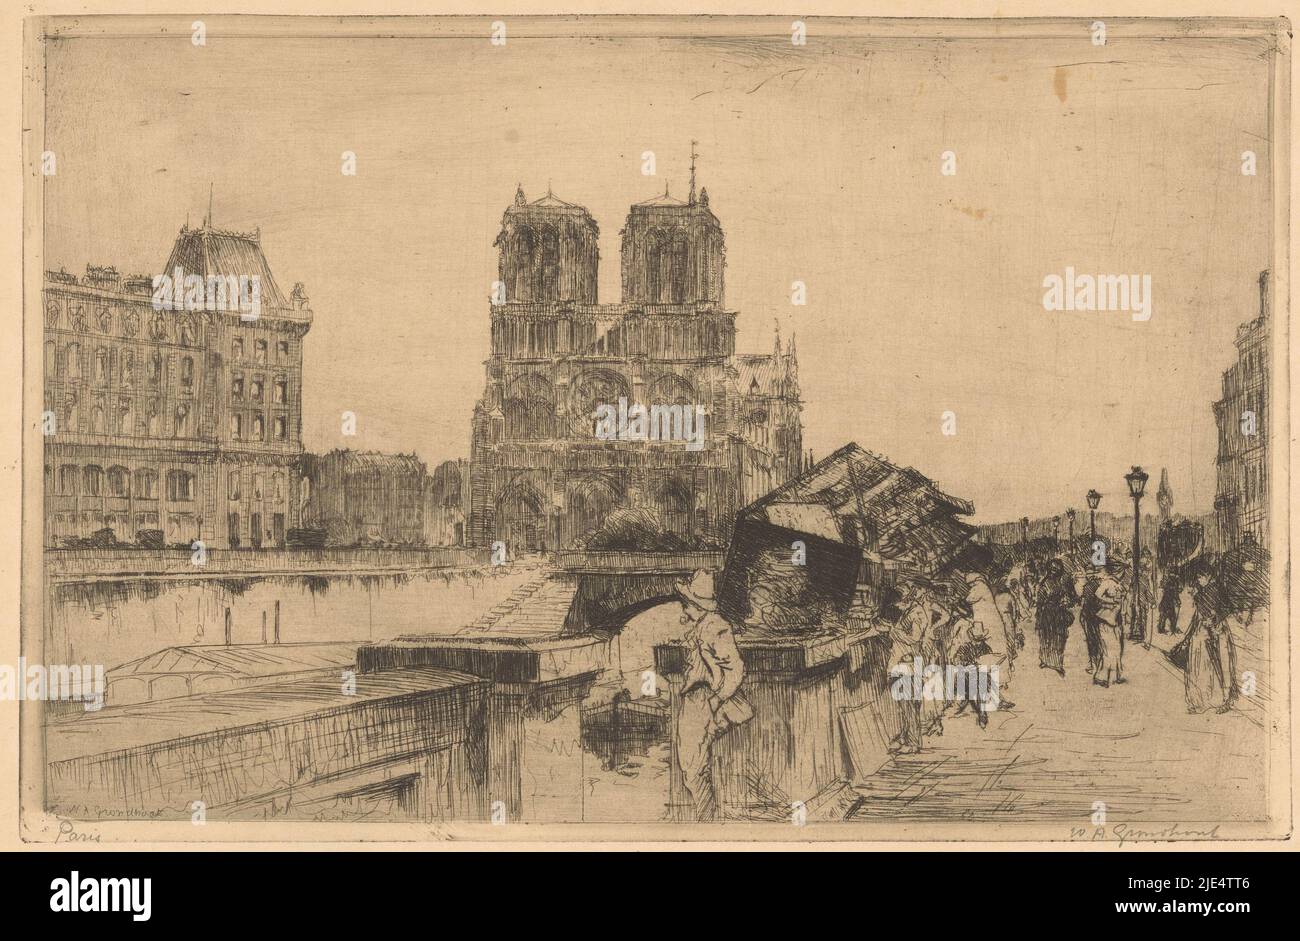 The Notre-Dame in Paris, seen from the Quai de Montebello. On the left the Seine that flows underneath the Pont au Double. On the right walking figures on the Quai de Montebello, Paris (original title on object)., print maker: Willem Adrianus Grondhout, (signed by artist), 1888 - 1934, paper, etching, h 224 mm × w 344 mm Stock Photo